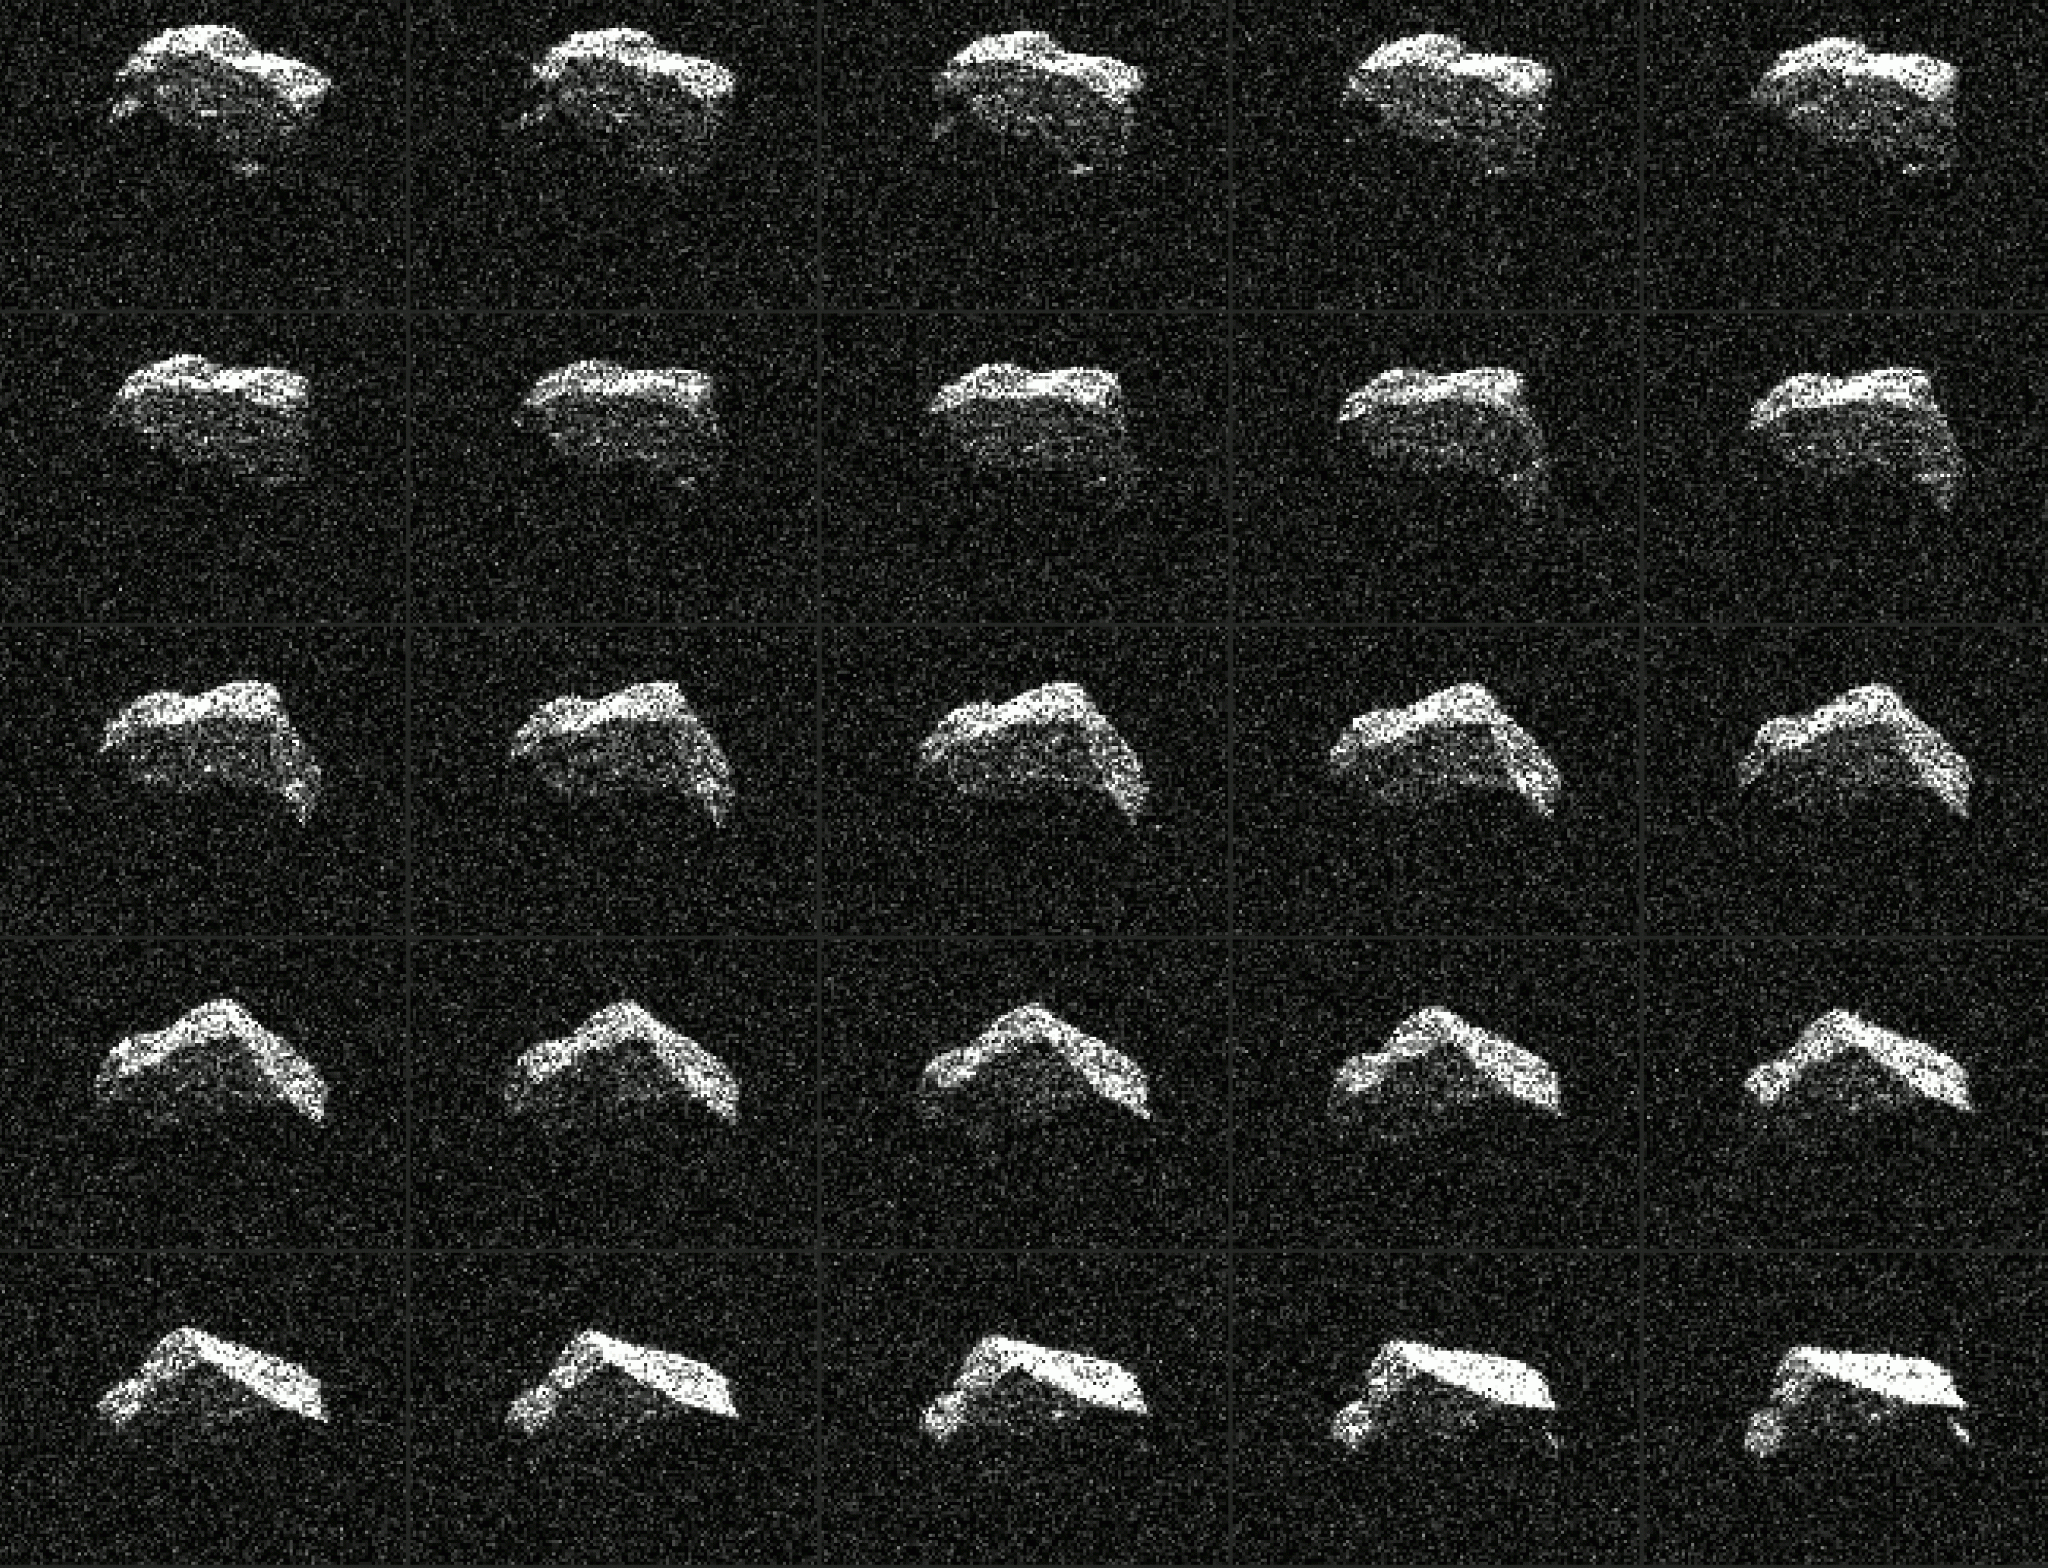 Composite of 25 images of asteroid 2017 BQ6 